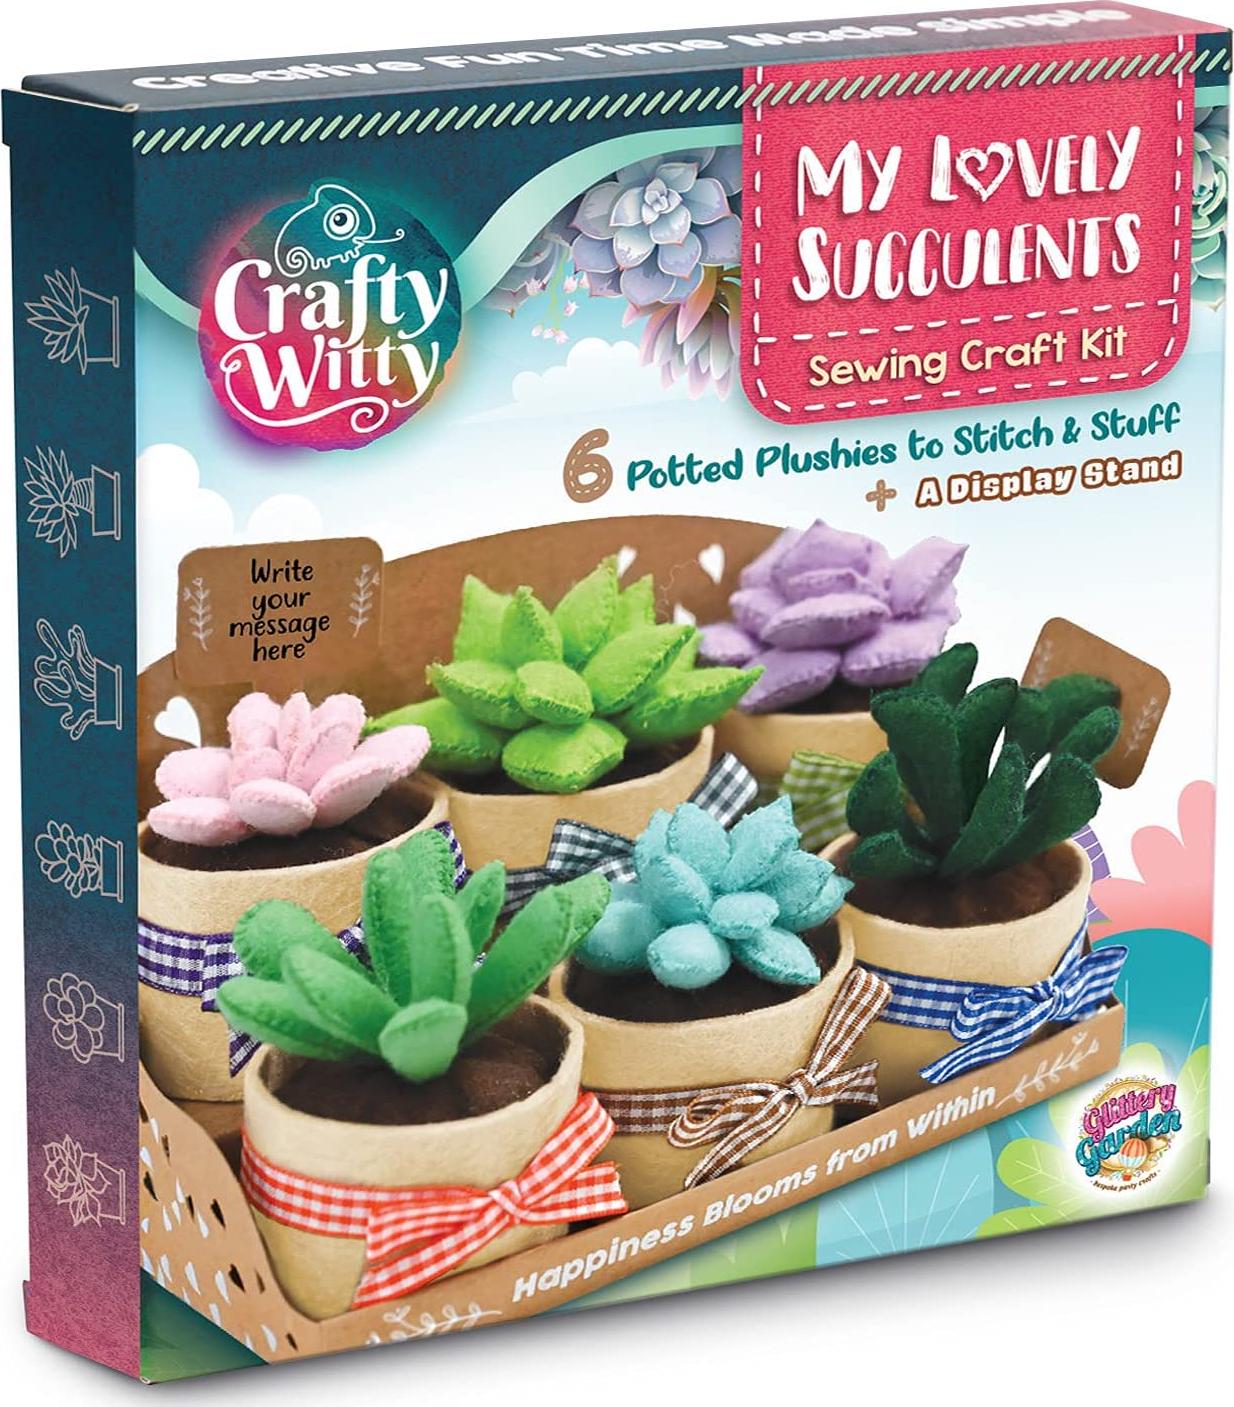 Glittery Garden, Felt Succulents Craft Kit. Make 6 Potted Colorful Plushies and A Display Rack. Mini Garden DIY Sewing Project, Activity Set, Arts and Crafts Supplies - Great Gift for Teens and Adults